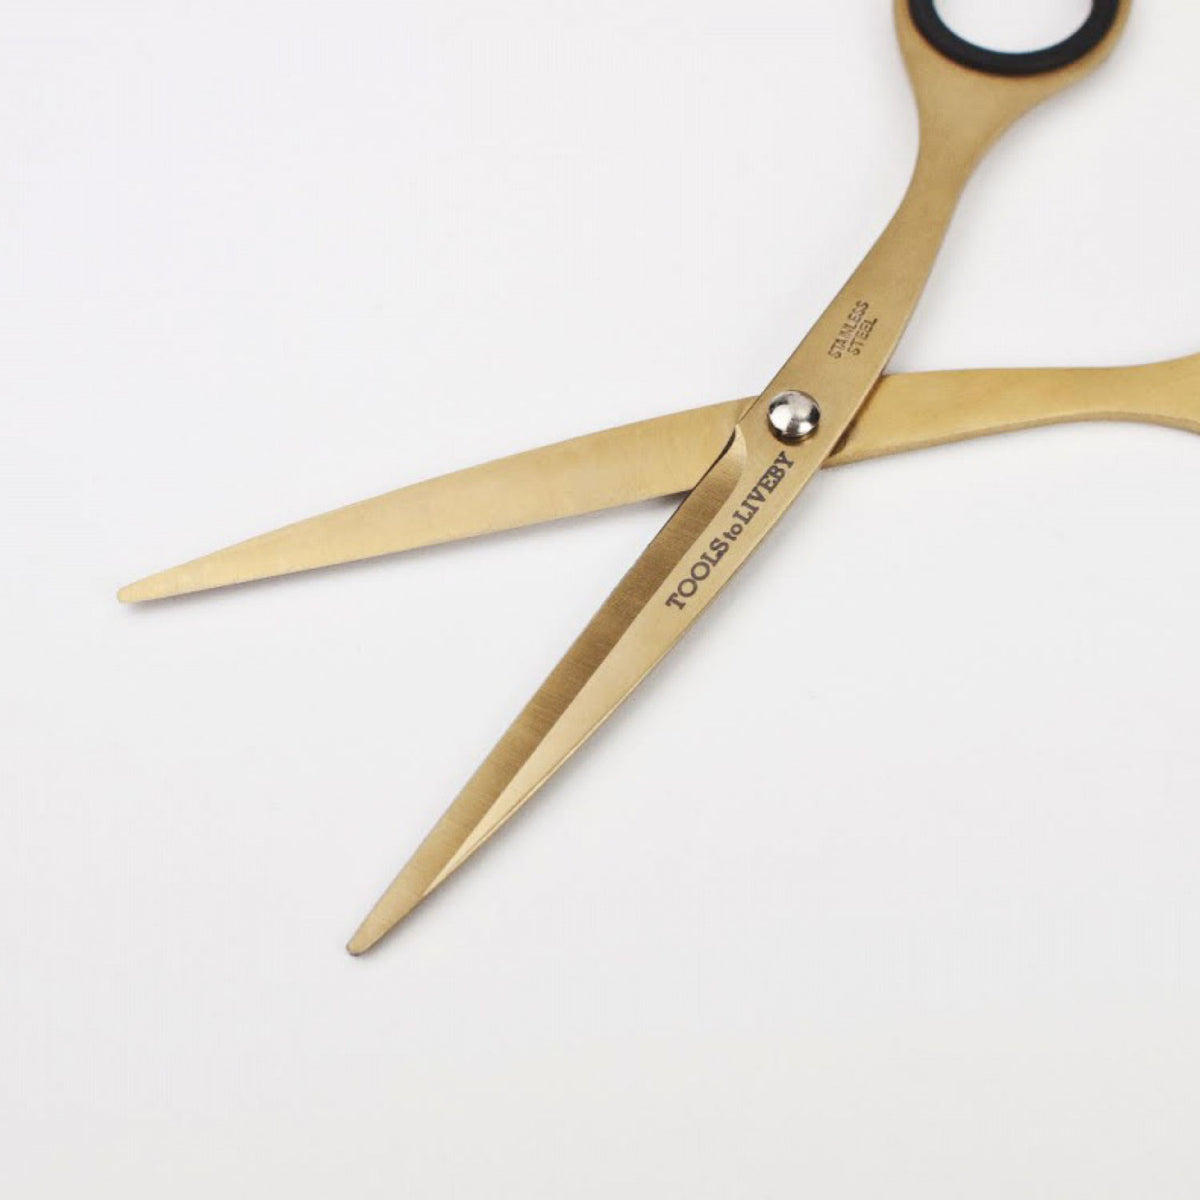 Tools to Liveby - Scissors - Small - Gold